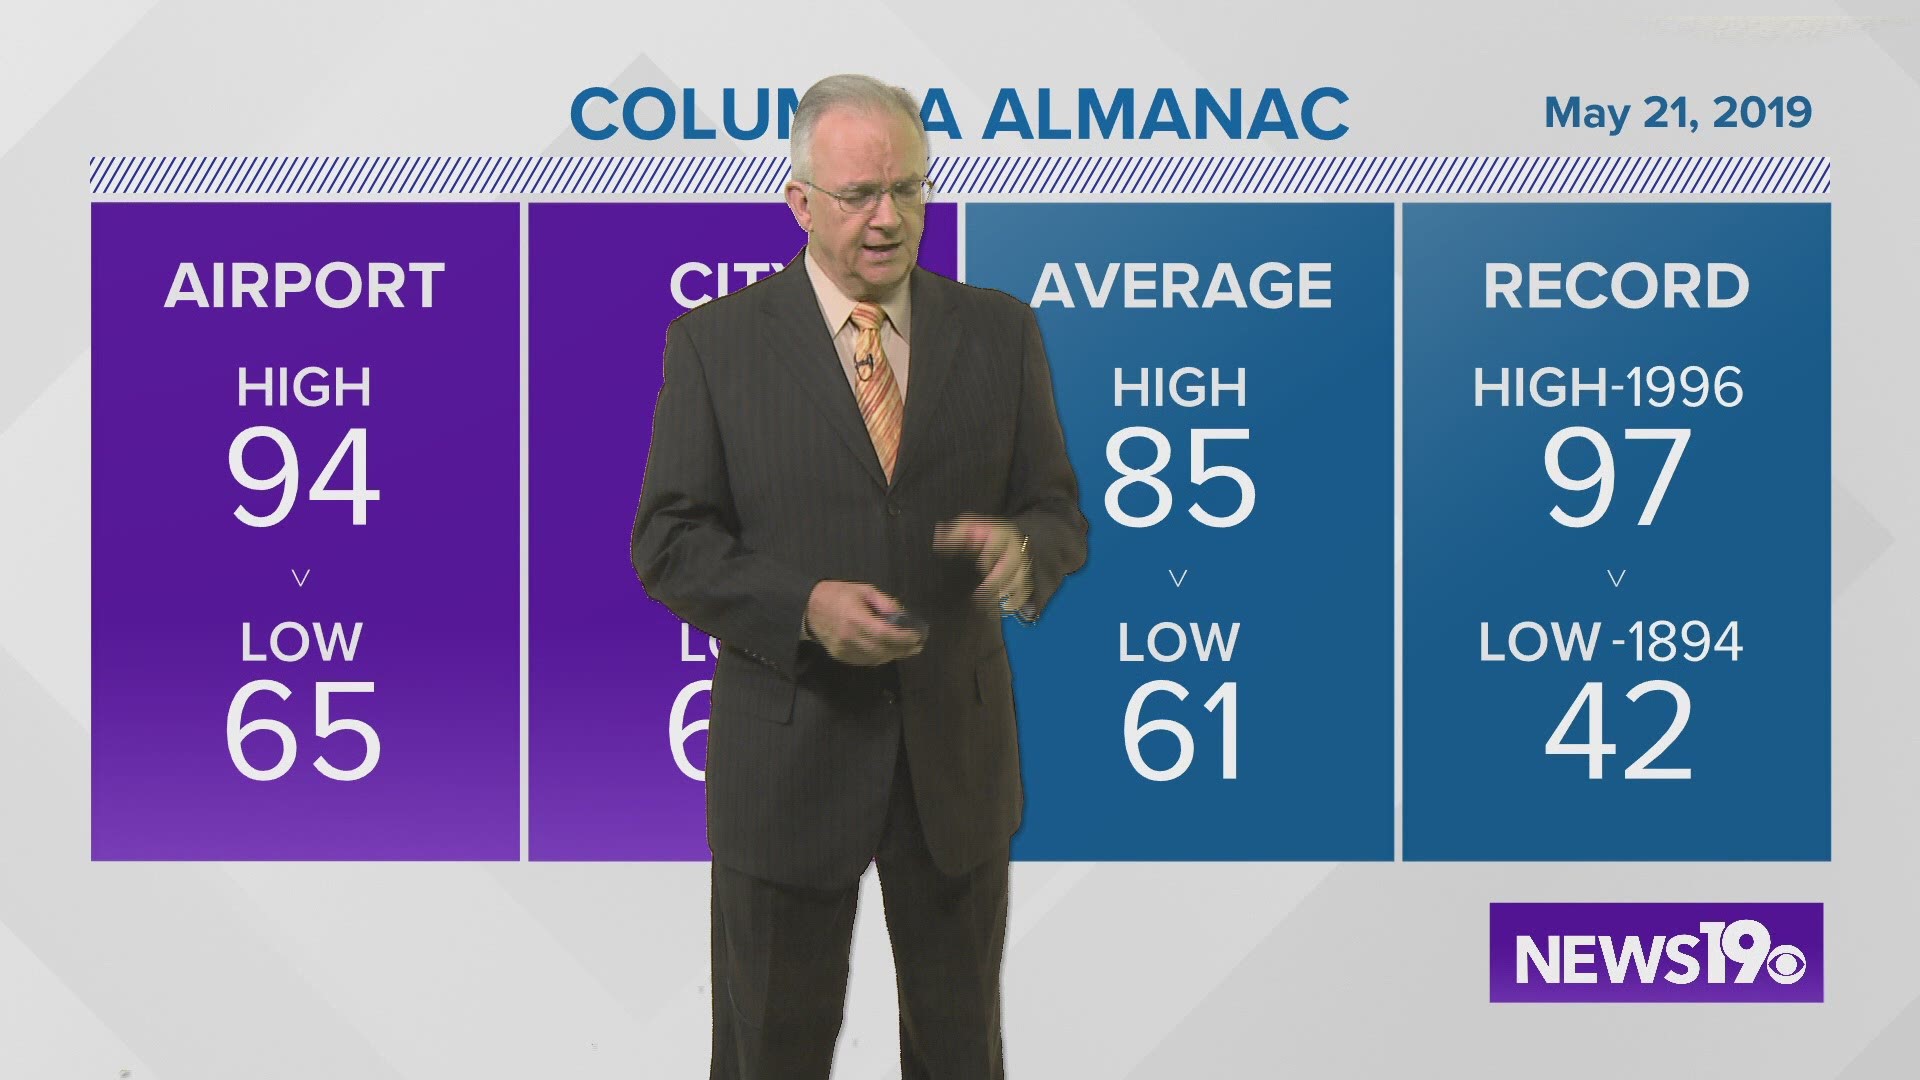 Jim Gandy's evening weather forecast for Tuesday, May 21, 2019.